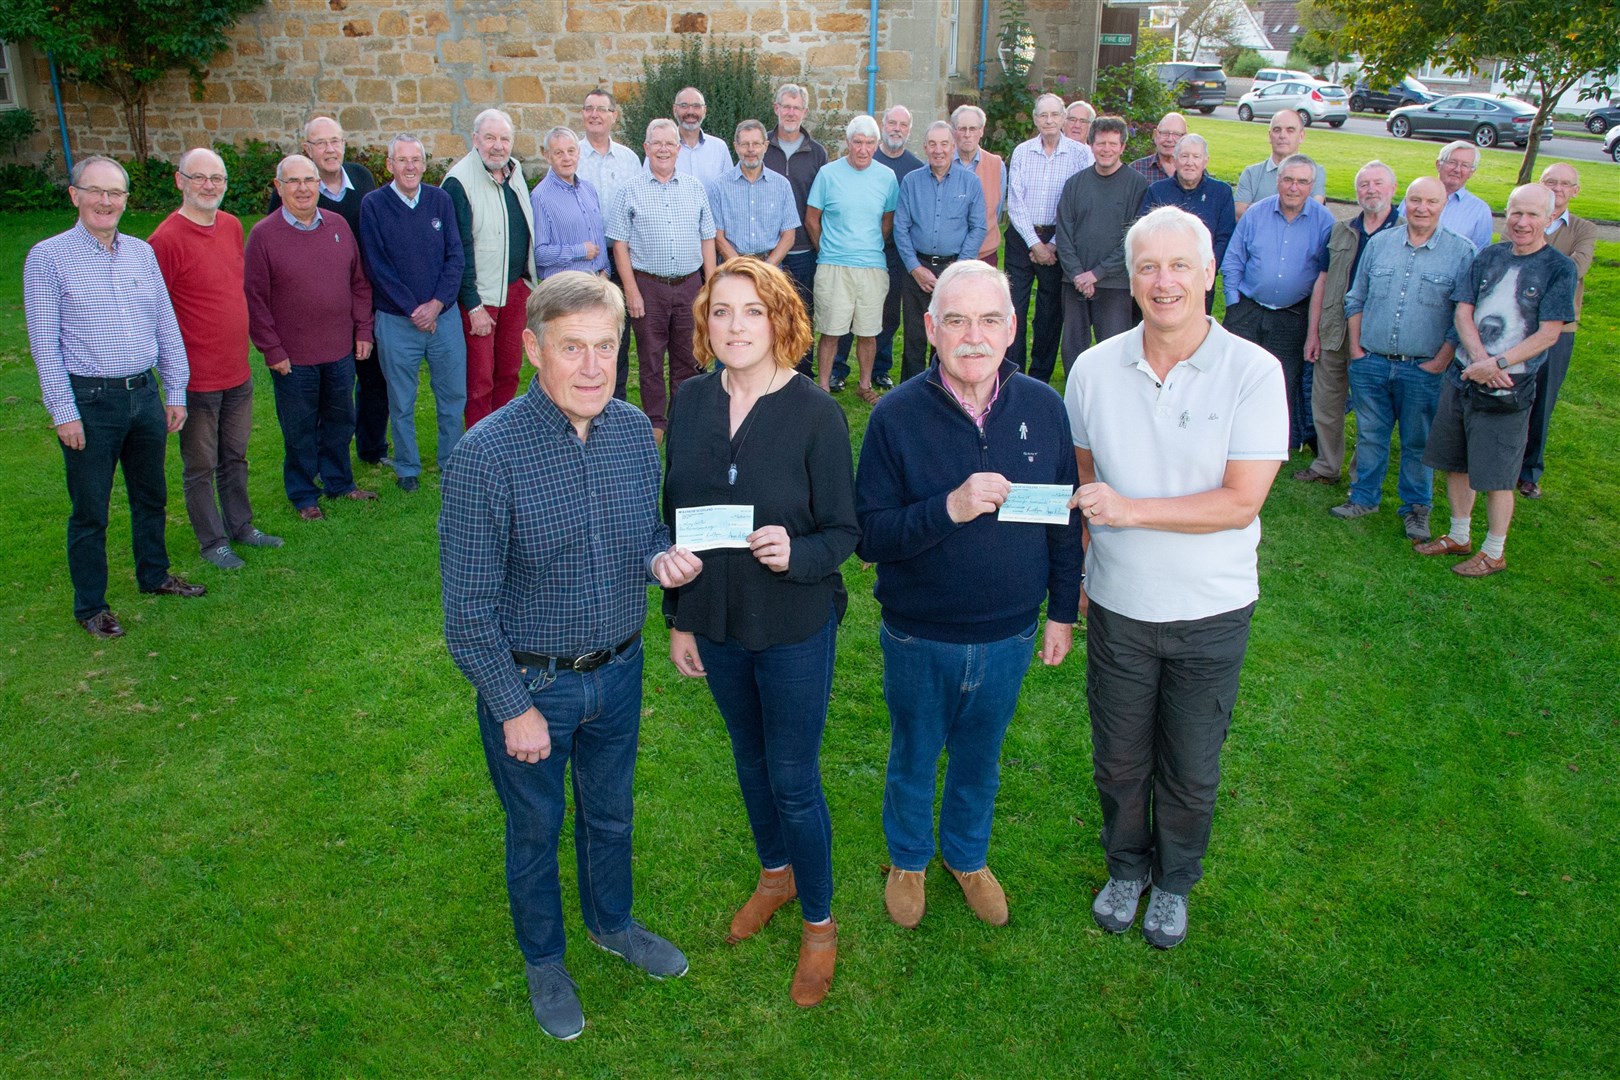 Glen Moray Male Voice Choir member Donald Brown (left) presents Gillian Pirie, of Moray Food Plus, with a cheque for £1000, while Angus Burnie (right) hands Dennis Thomson a cheque for £1500 for Prostrate Cancer UK. Picture: Daniel Forsyth.